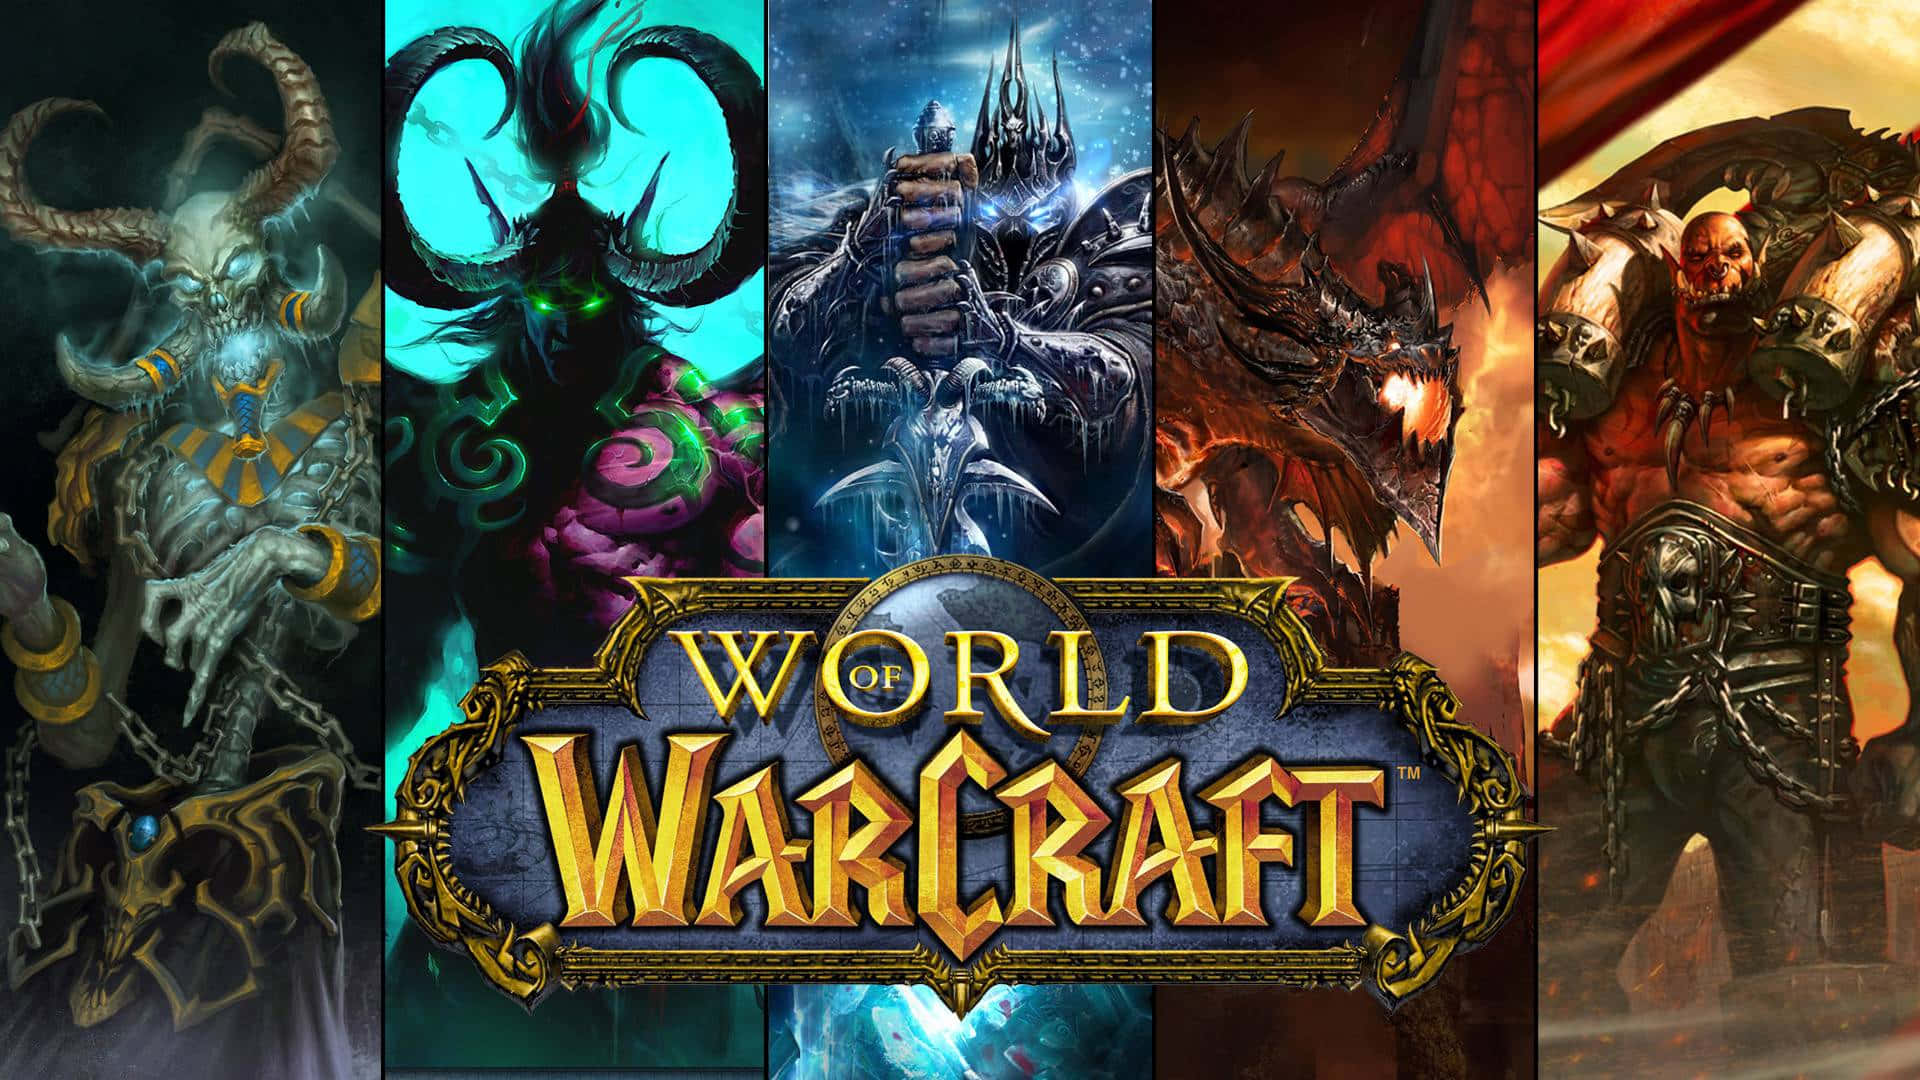 How World of Warcraft Was Made: The Definitive Inside Story of